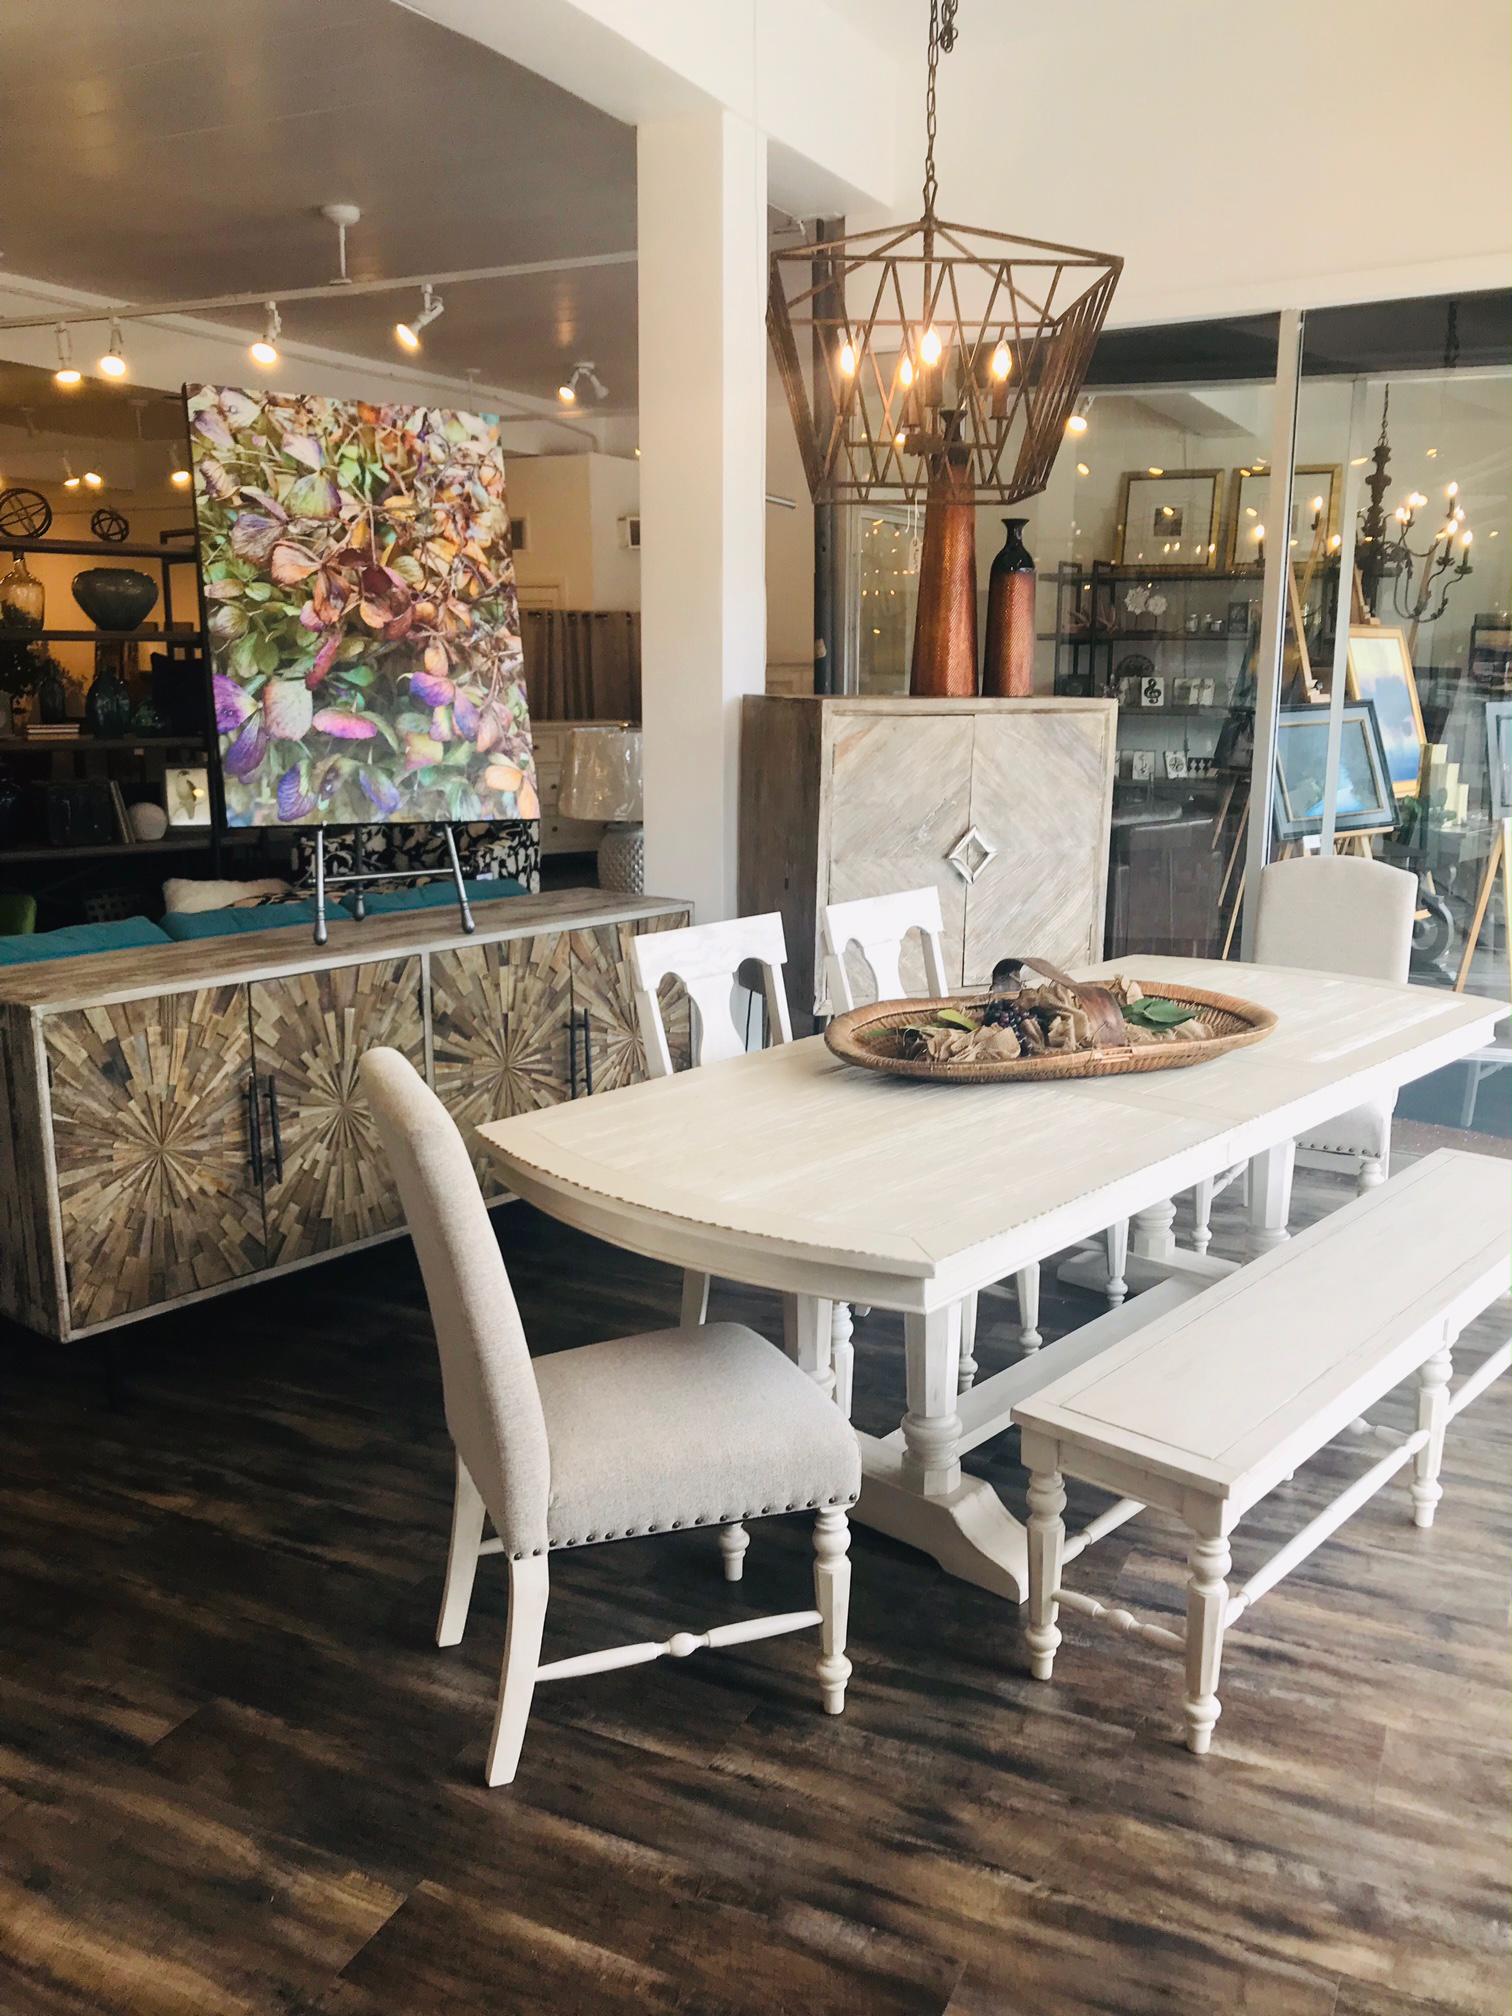 Brooks Dining new line for modern farmhouse - what a pretty look, see in person at Curated Fine Furnishings & Design - call 513.683.2233